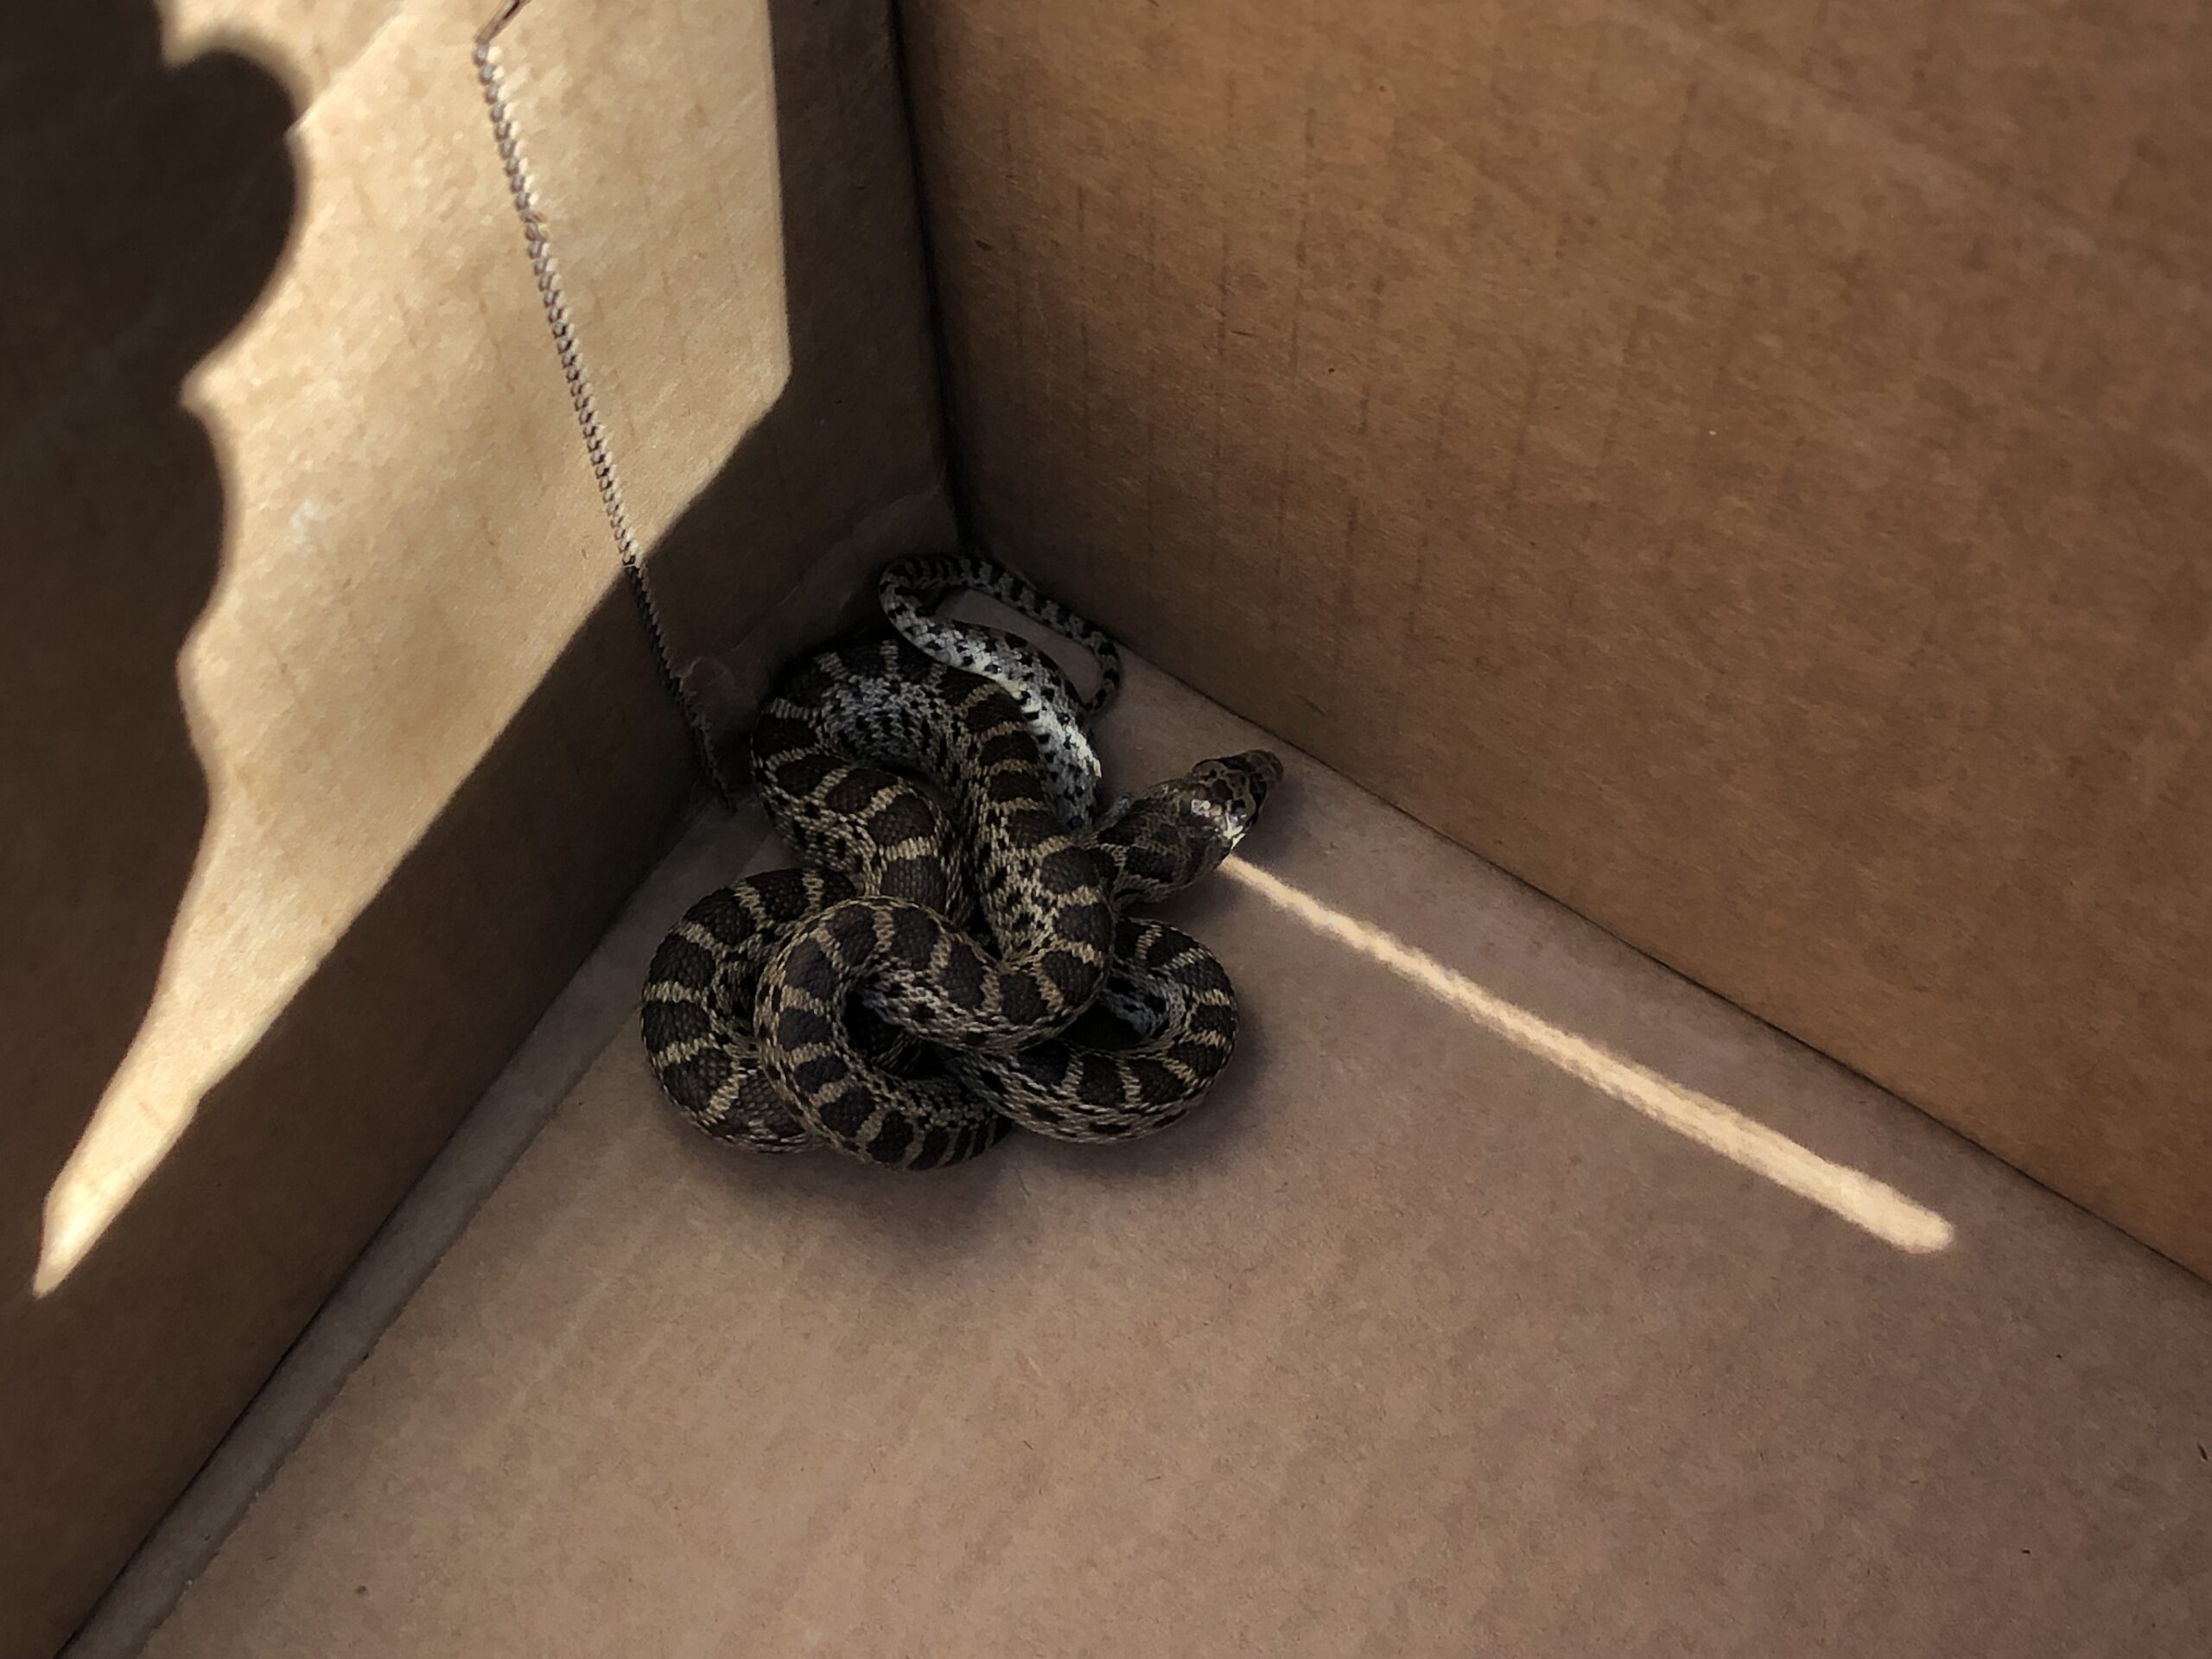 The wee gopher snake